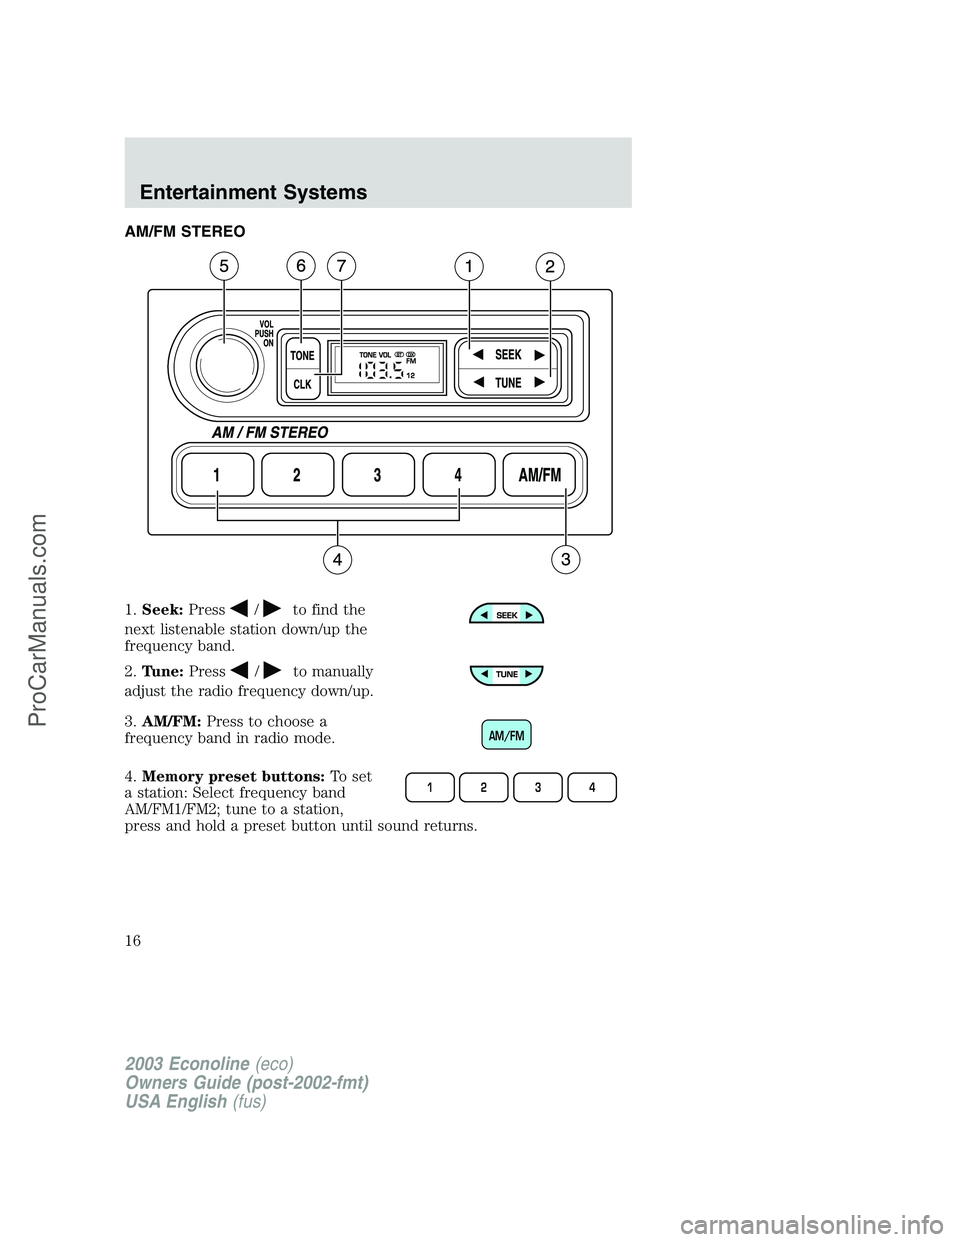 FORD E-350 2003  Owners Manual AM/FM STEREO
1.Seek:Press
/to find the
next listenable station down/up the
frequency band.
2.Tune:Press
/to manually
adjust the radio frequency down/up.
3.AM/FM:Press to choose a
frequency band in rad